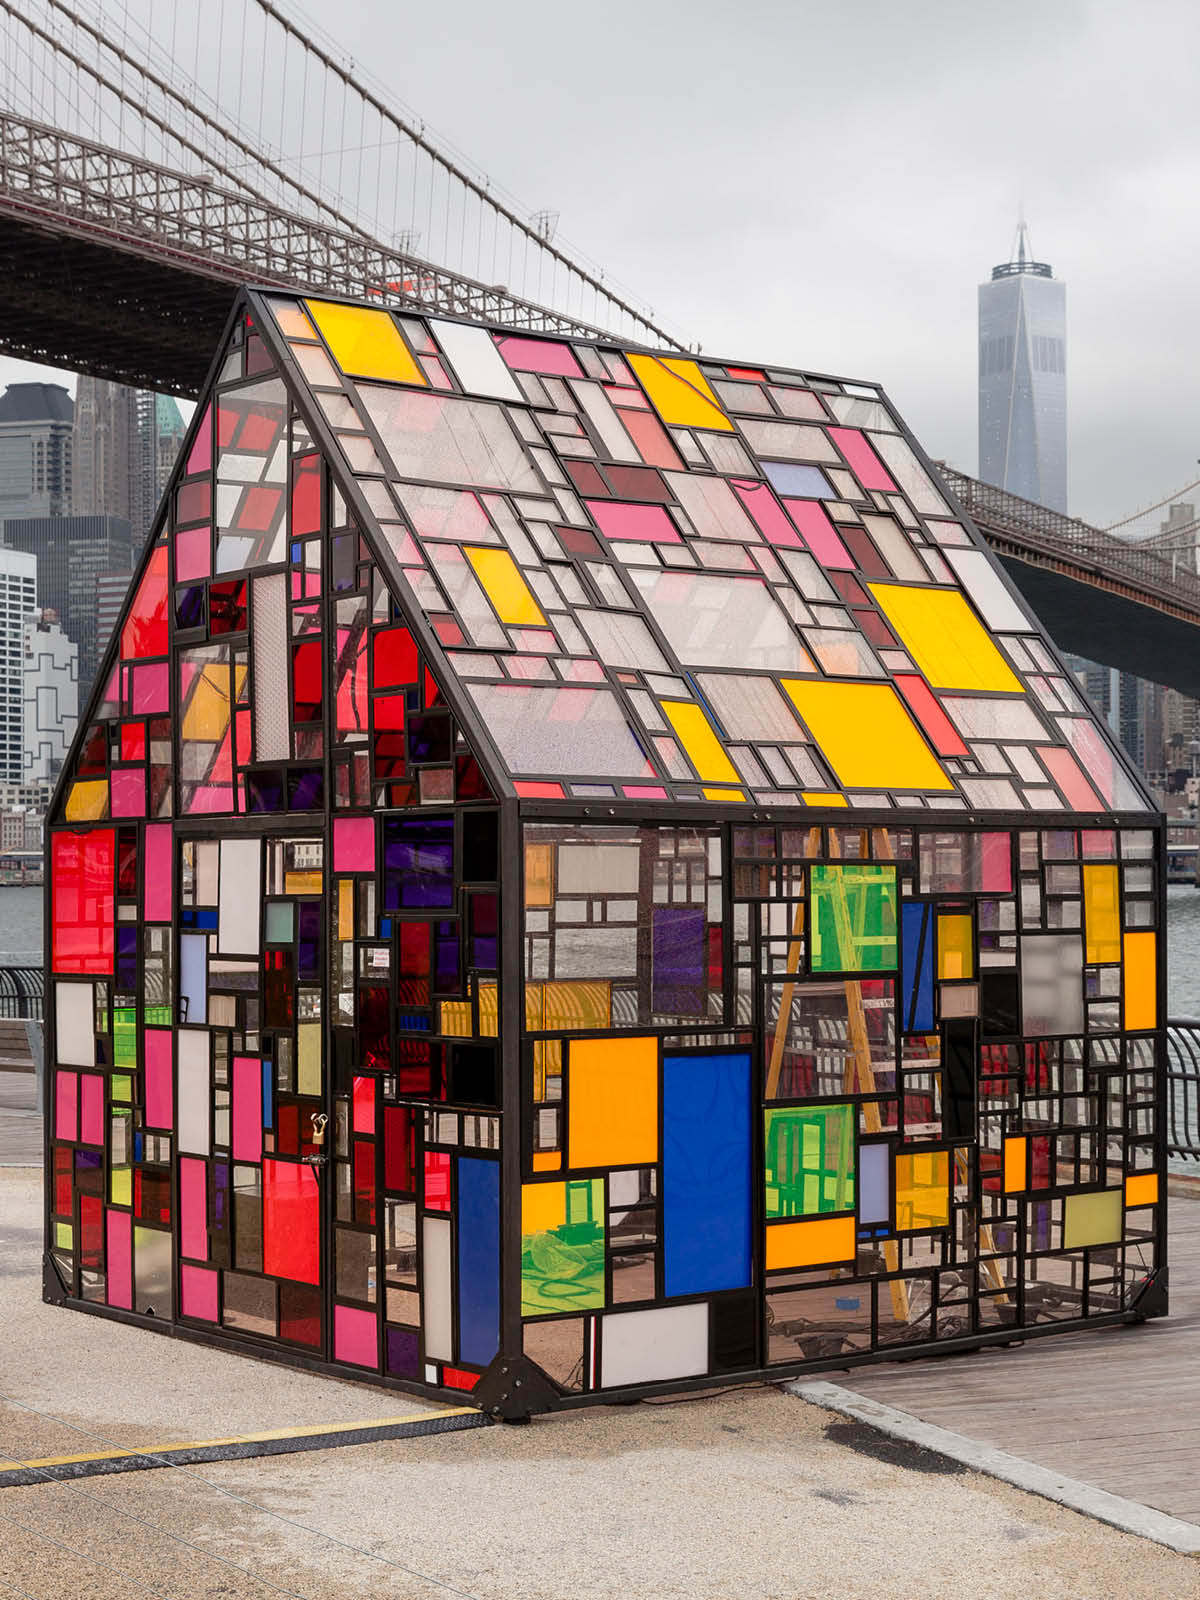 Tom Fruin and CoreAct: Kolonihavehus, 2010, a stained glass house on the Empire Futon Ferry Boardwalk